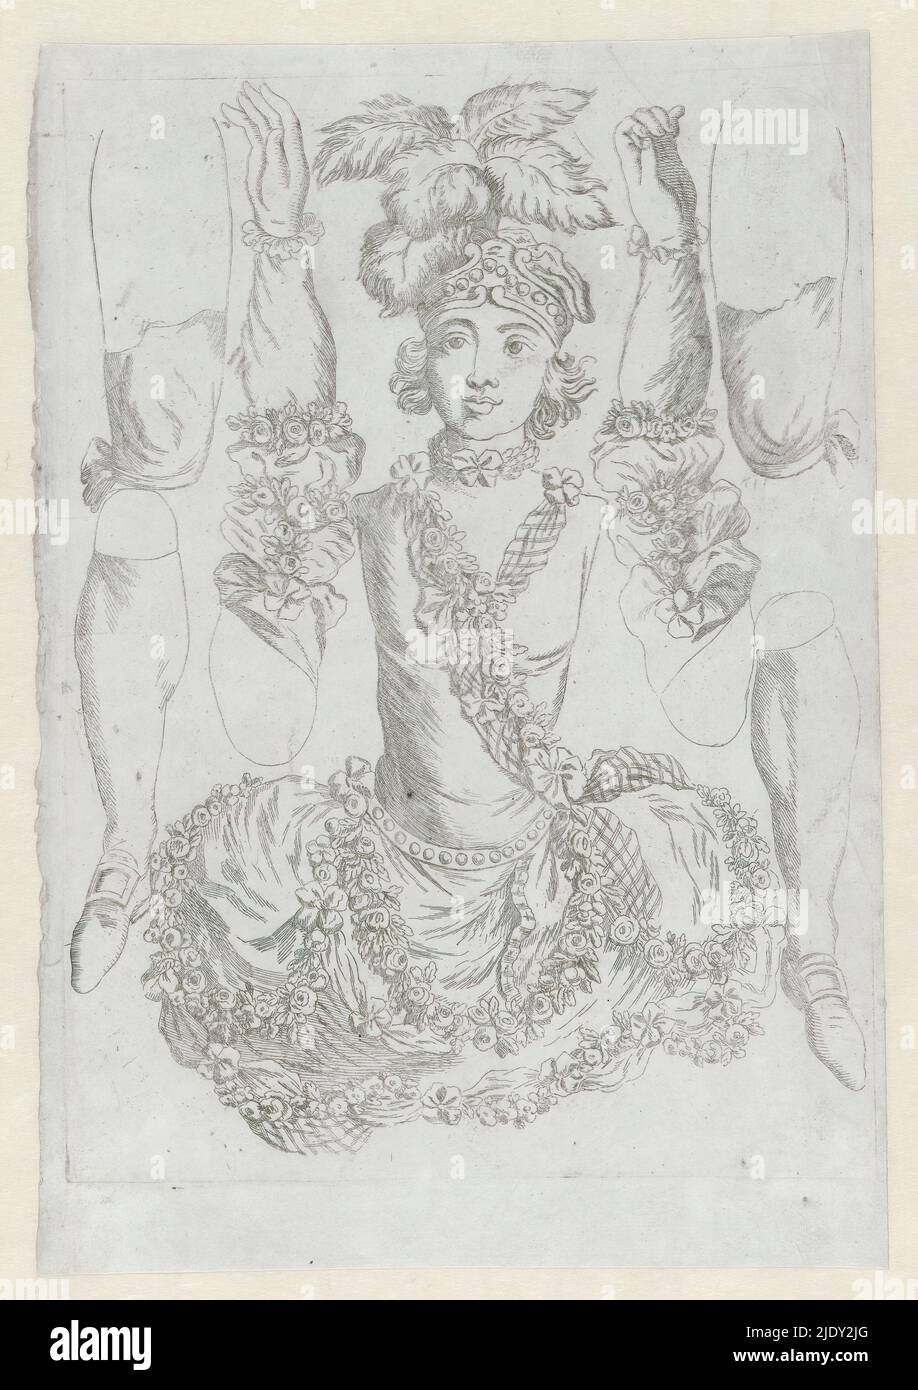 Female Tug, Female Tug (Pantin) with head, body of young woman, dressed in a dress decorated with flower garlands; four loose parts with two legs and shod feet and two arms and hands., print maker: anonymous, France, (possibly), c. 1740 - c. 1800, paper, etching, height 294 mm × width 215 mm Stock Photo